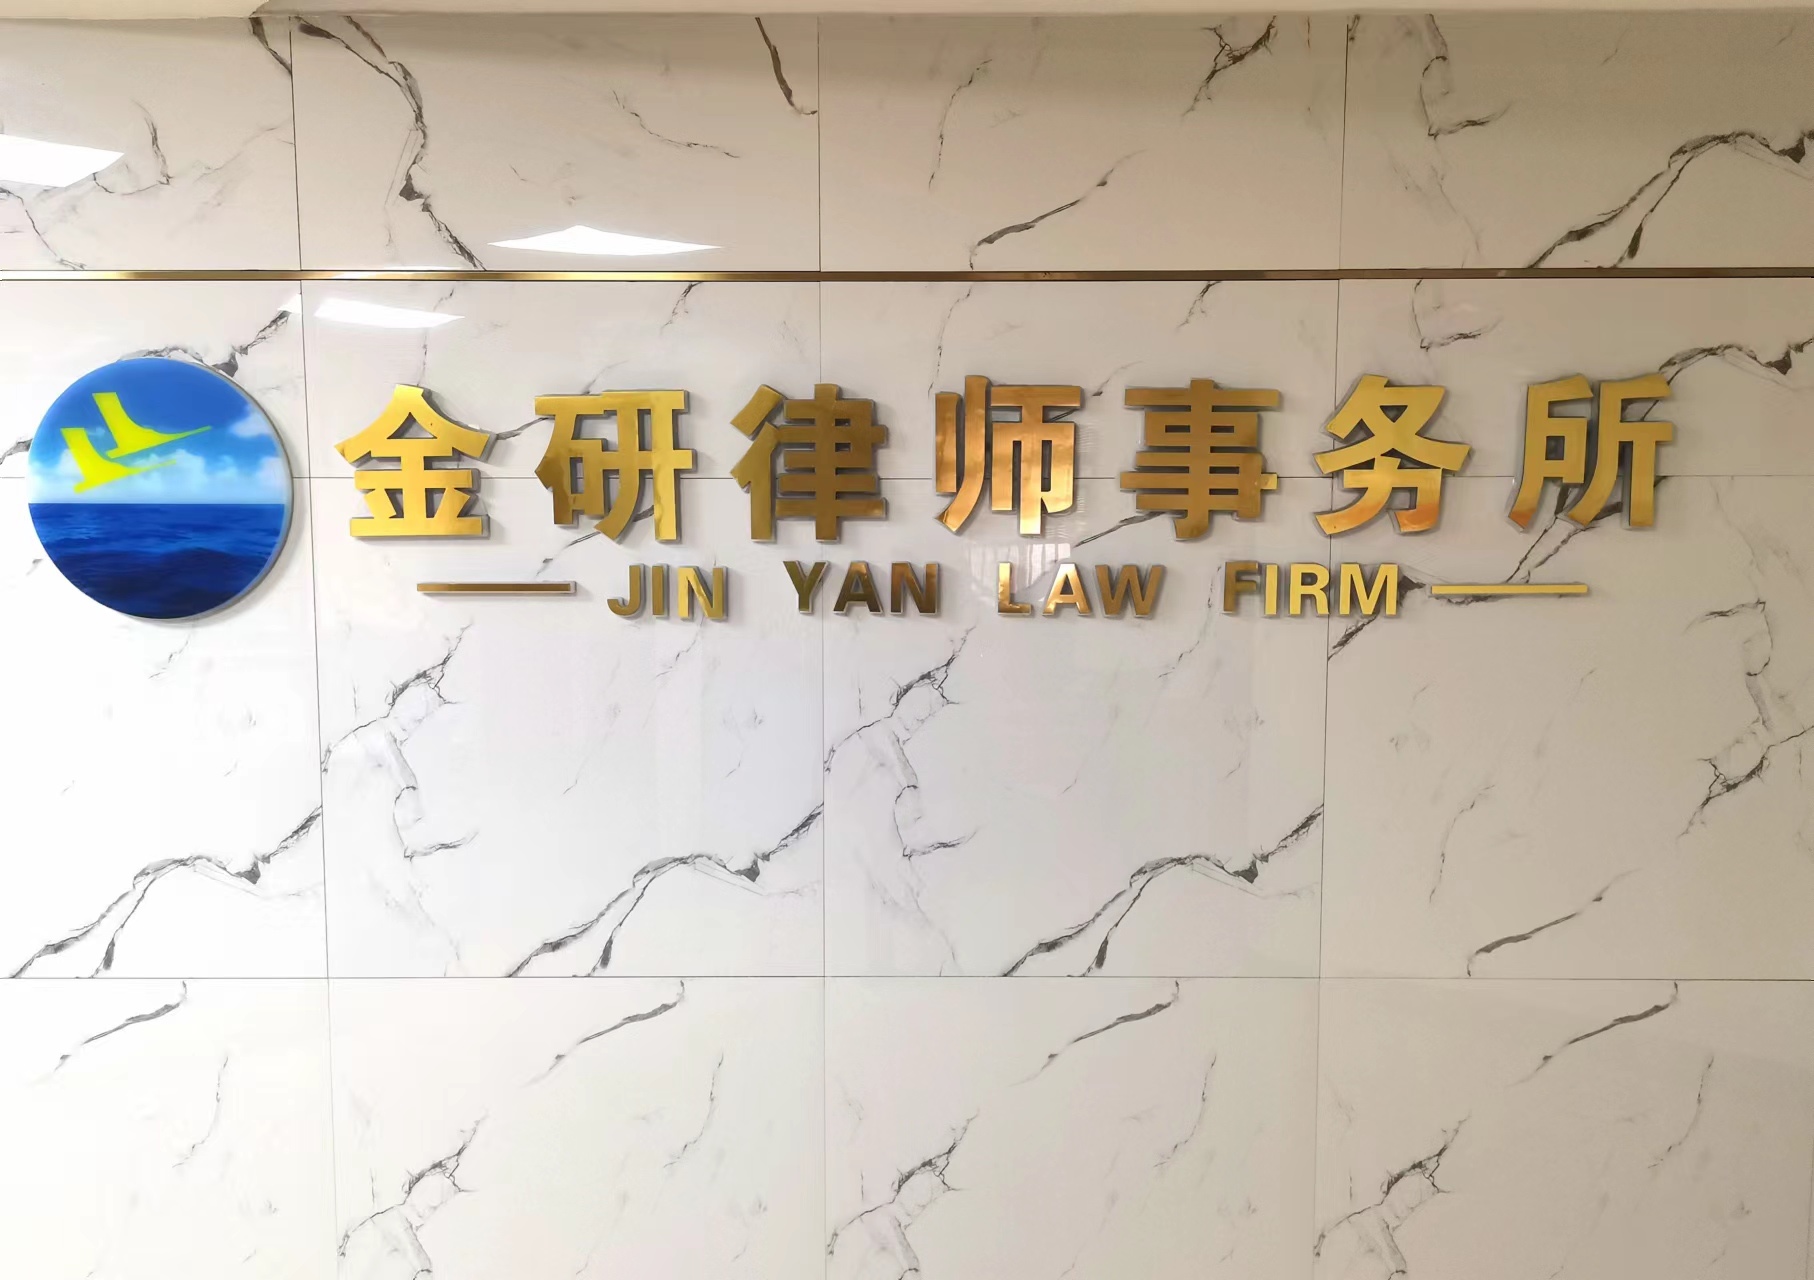 Jin Yan said case | the death of the creditor, can the heir inherit the creditor's rights?